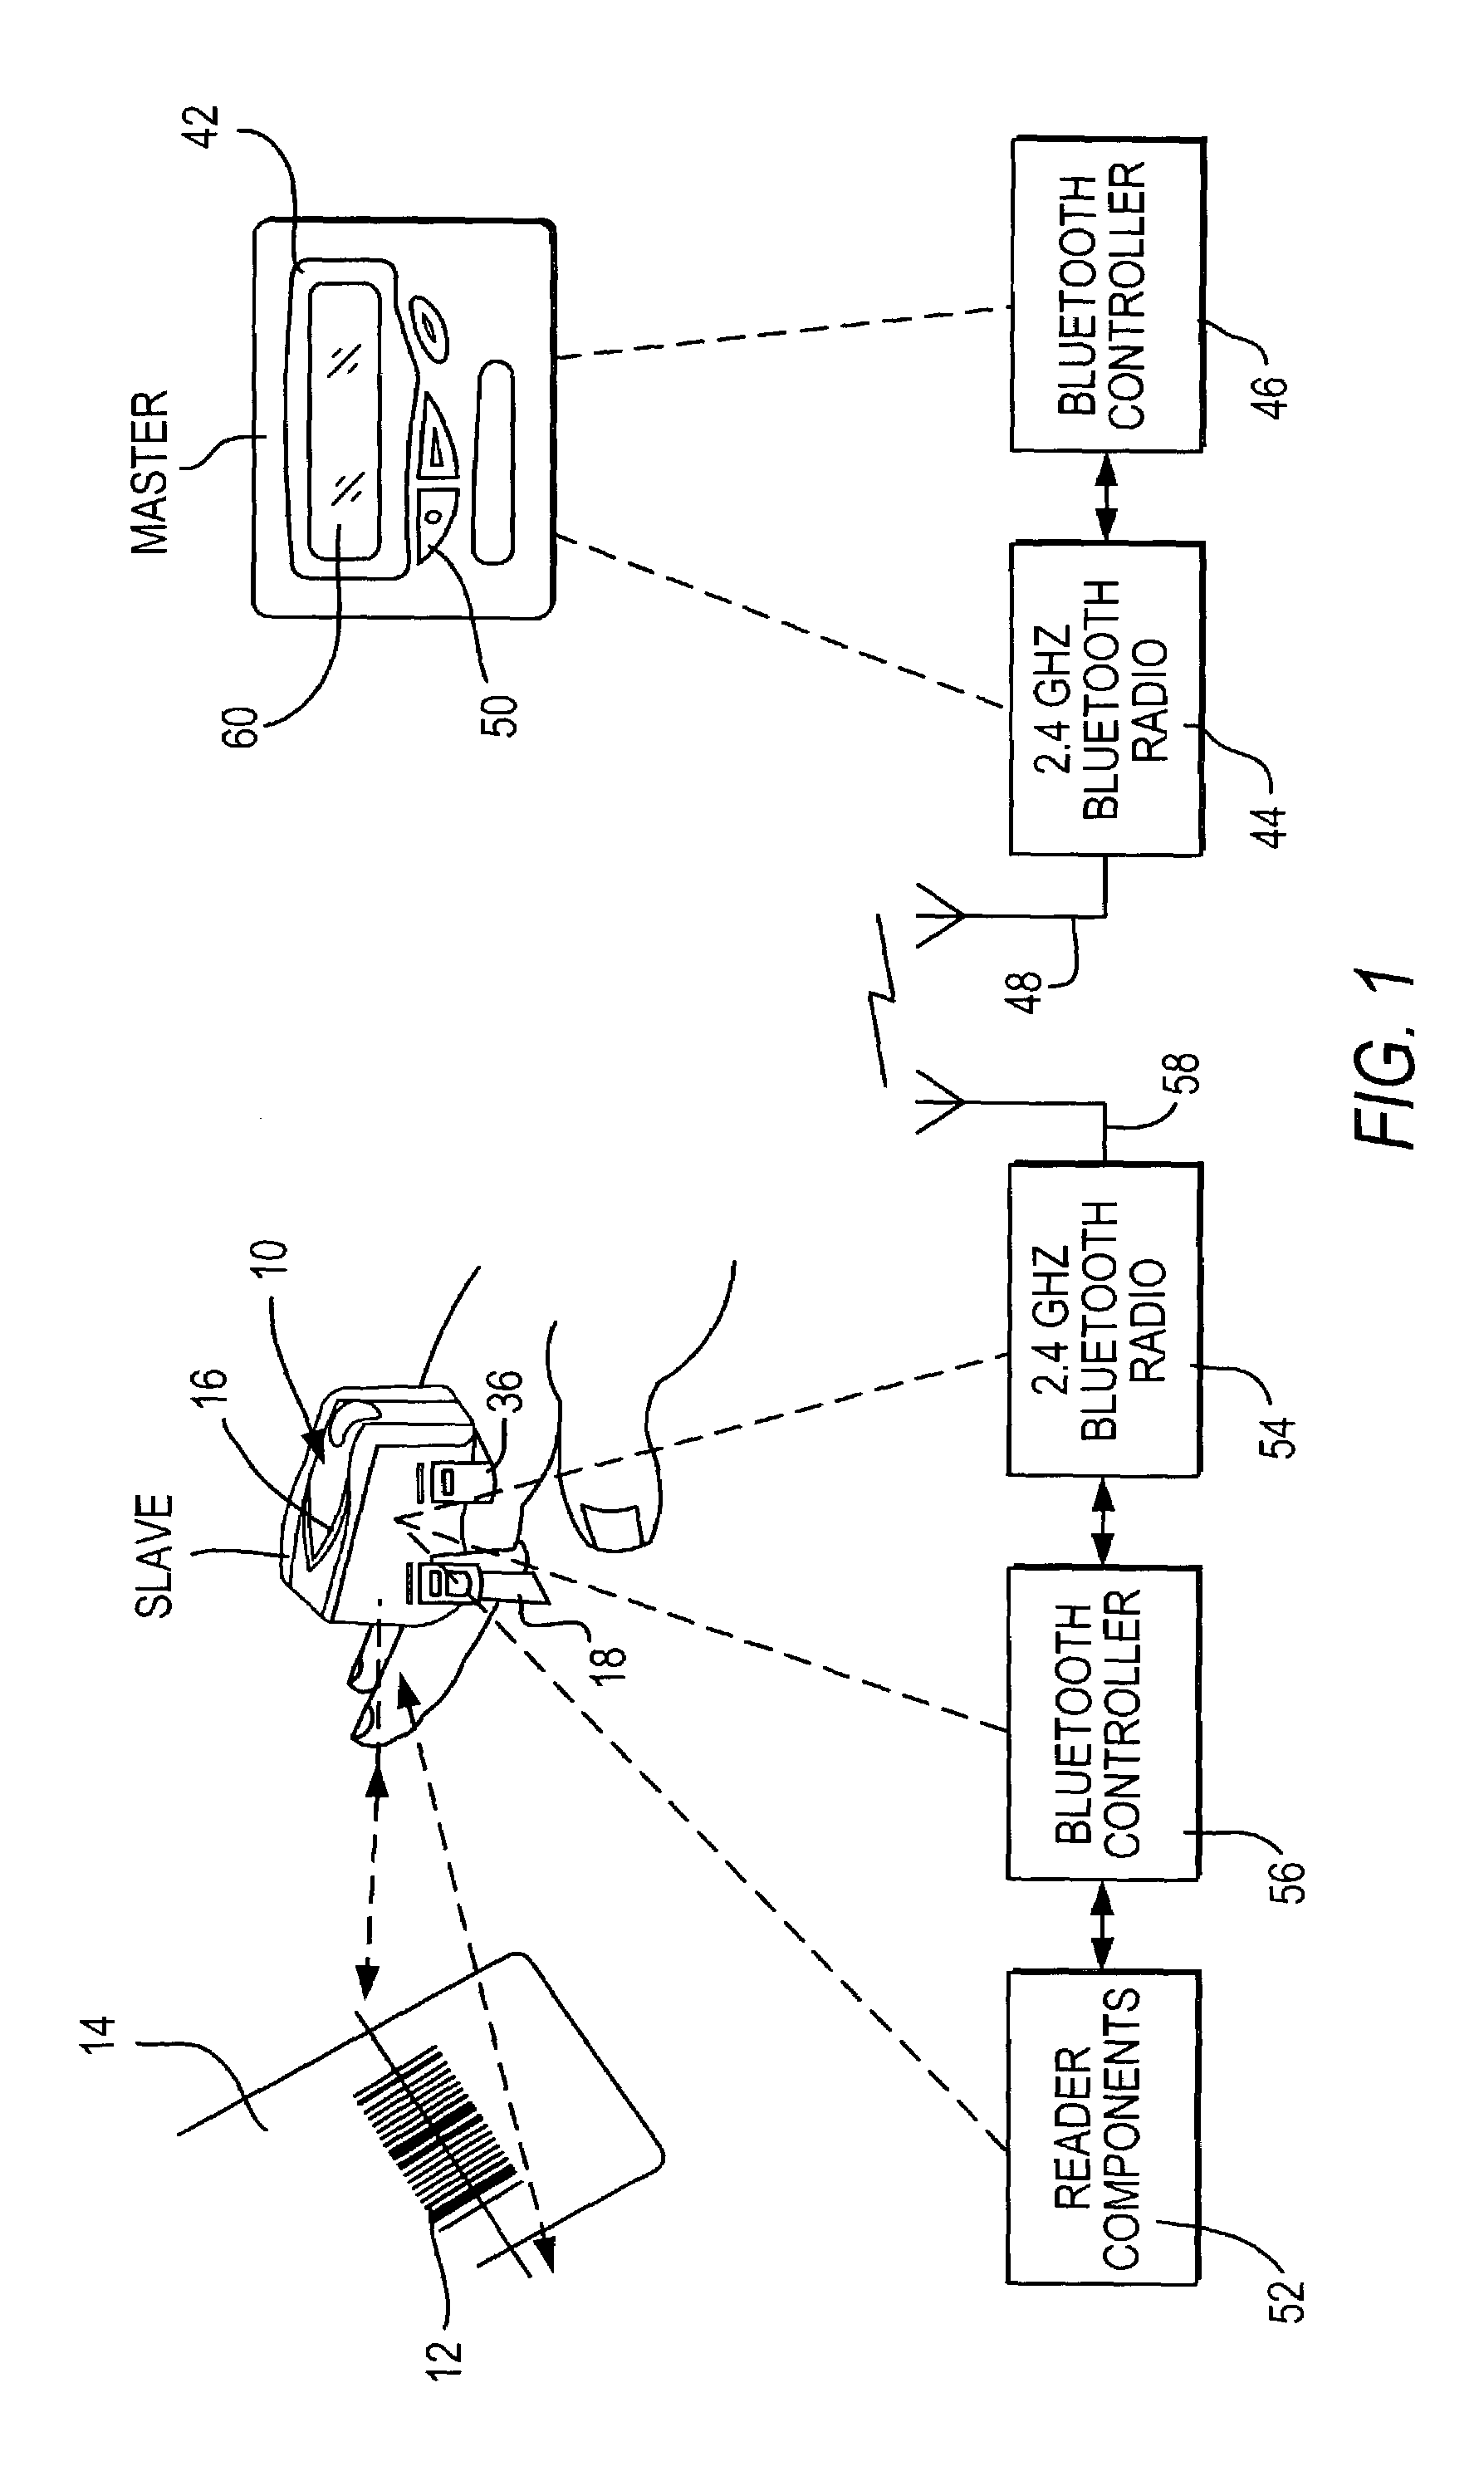 Method of and arrangement for minimizing power consumption and data latency of an electro-optical reader in a wireless network